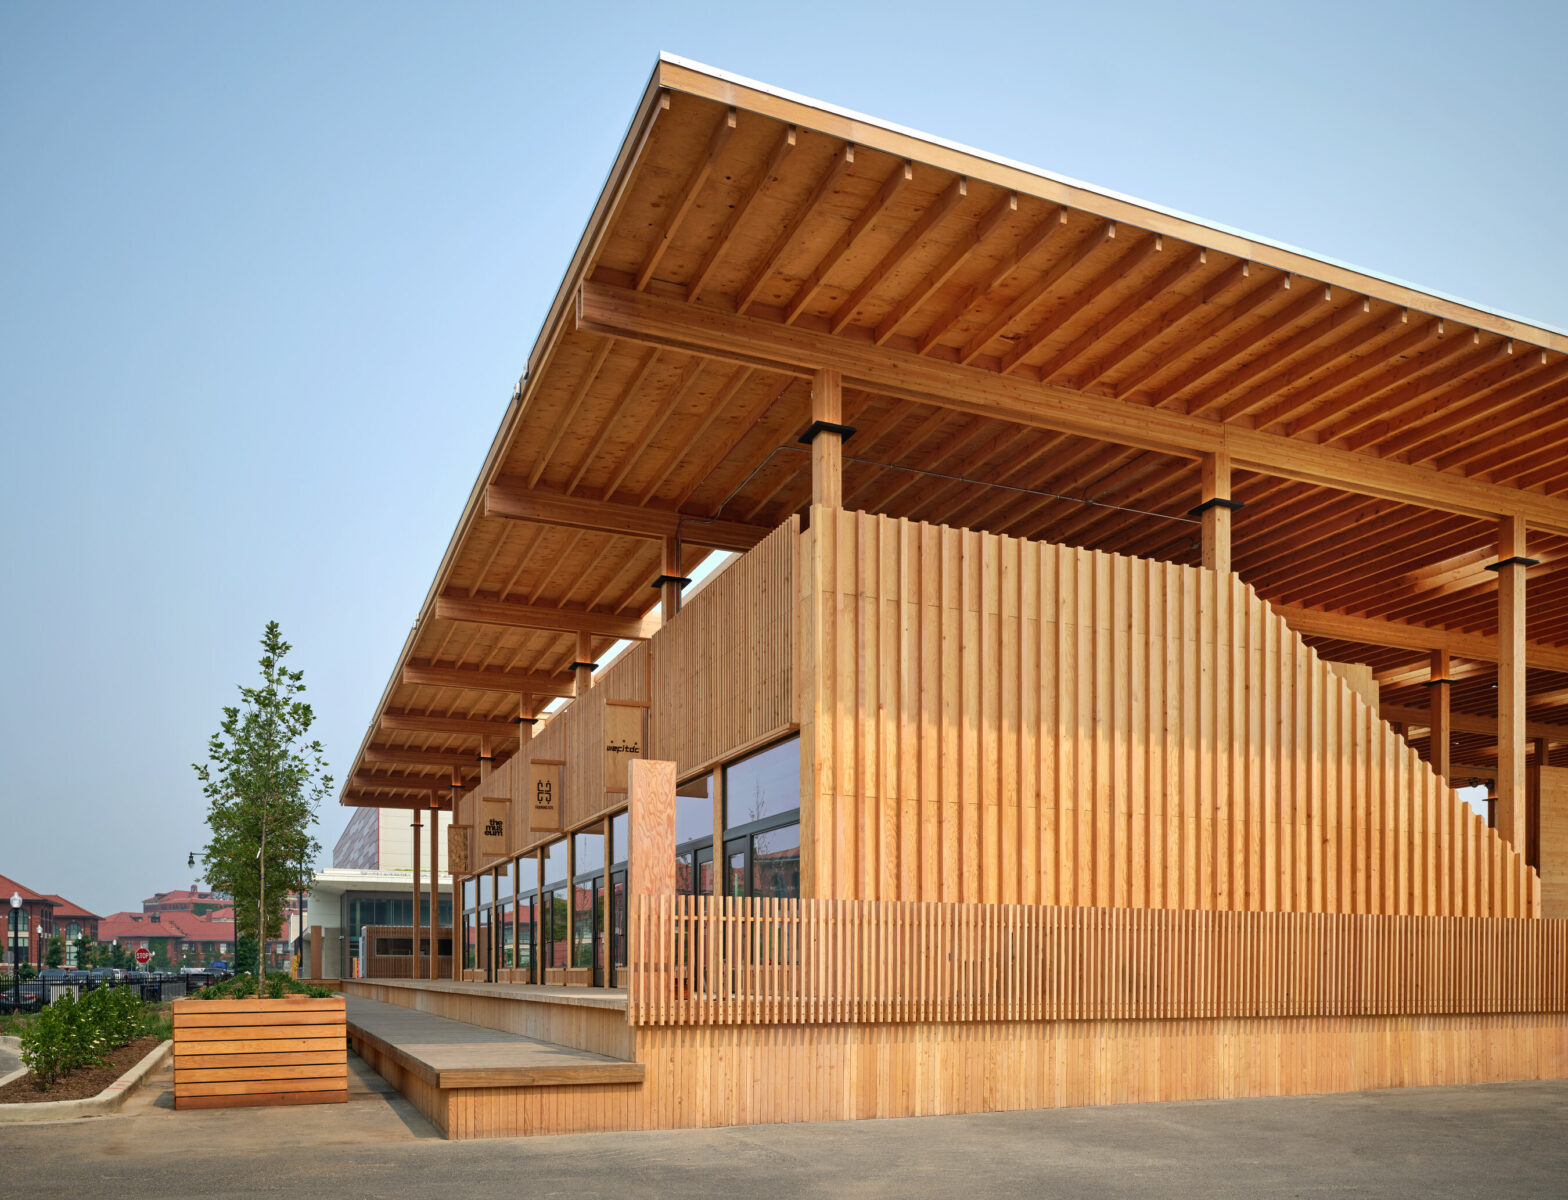 Architectural photo of mass timber pavilion with retail store fronts